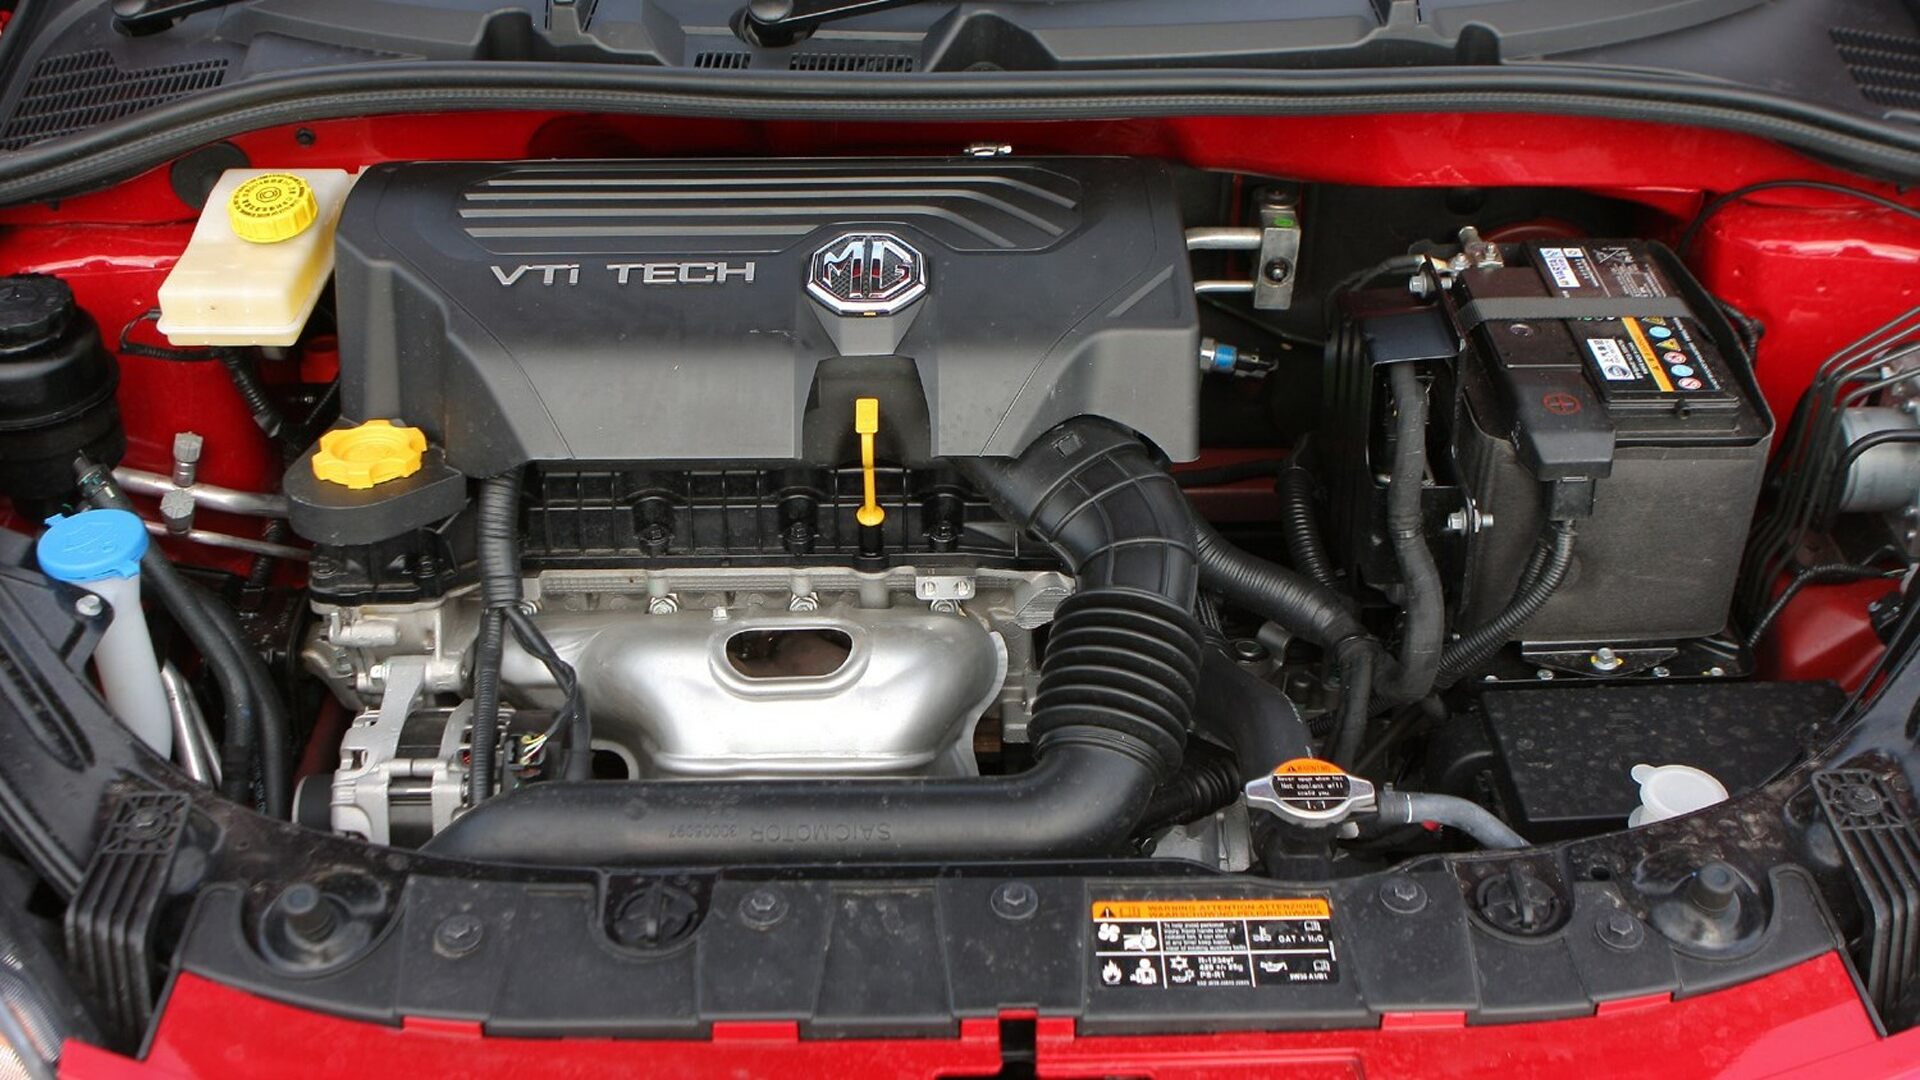 The Engine Bay Of The MG 3